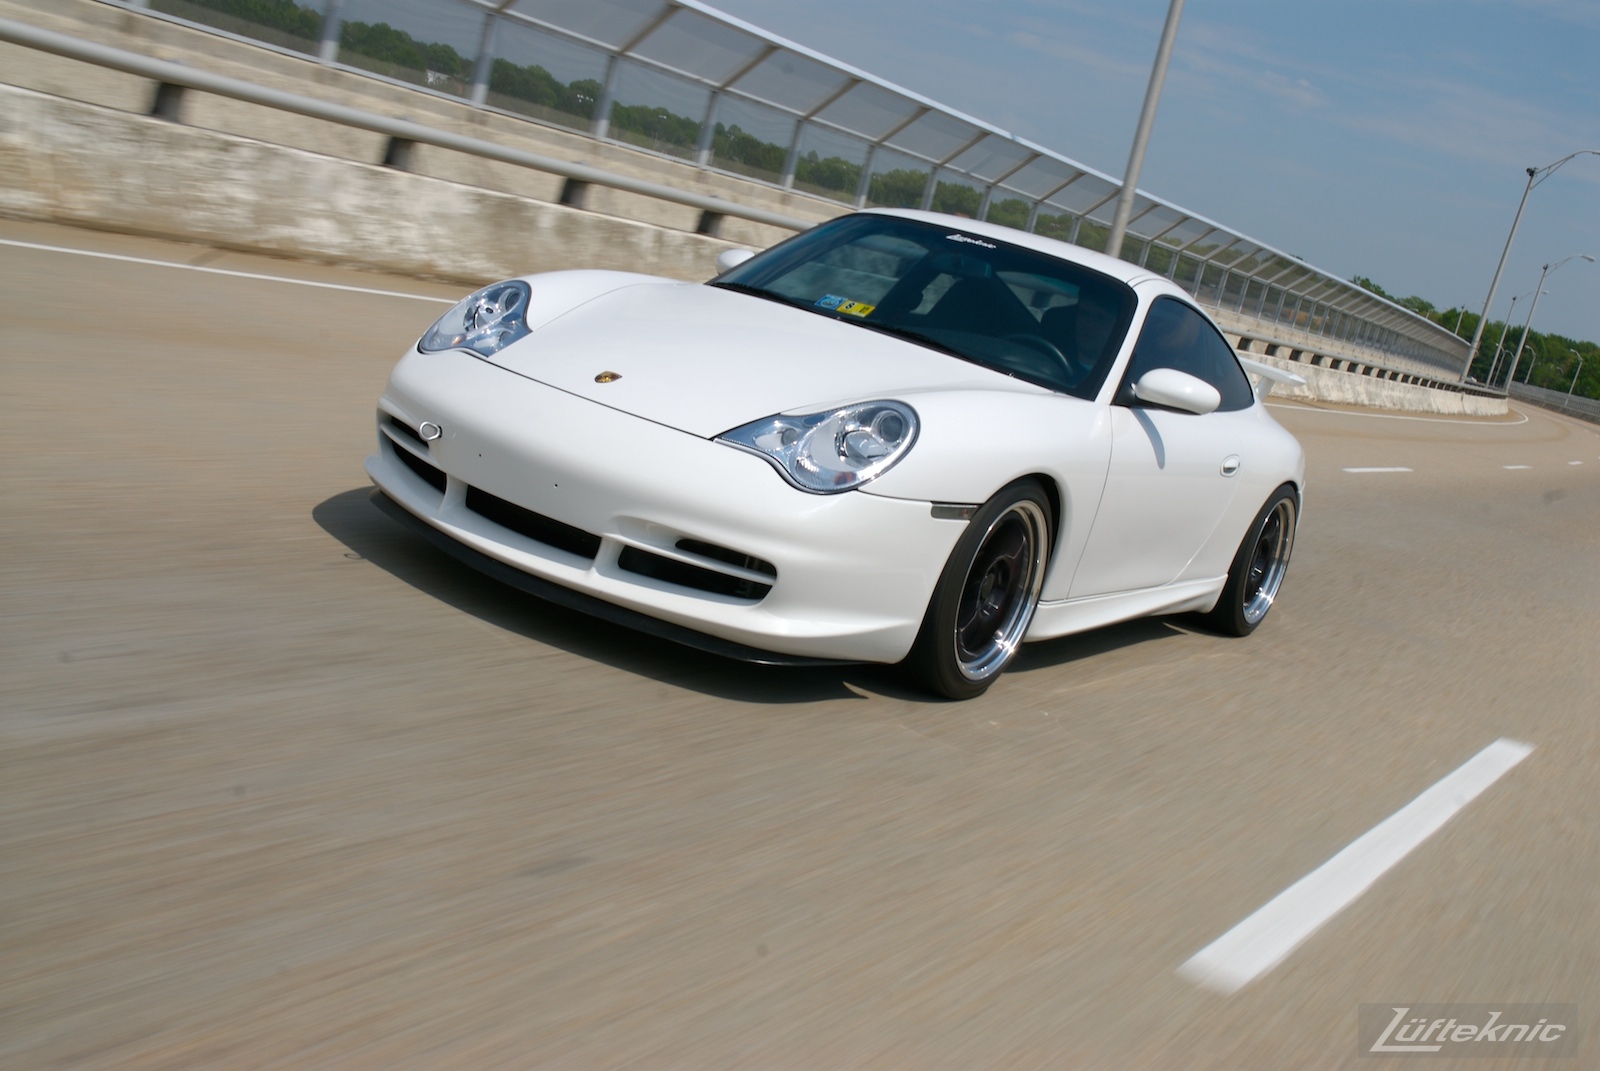 A track-prepped white Porsche 996 Gt3 with Fikse wheels.